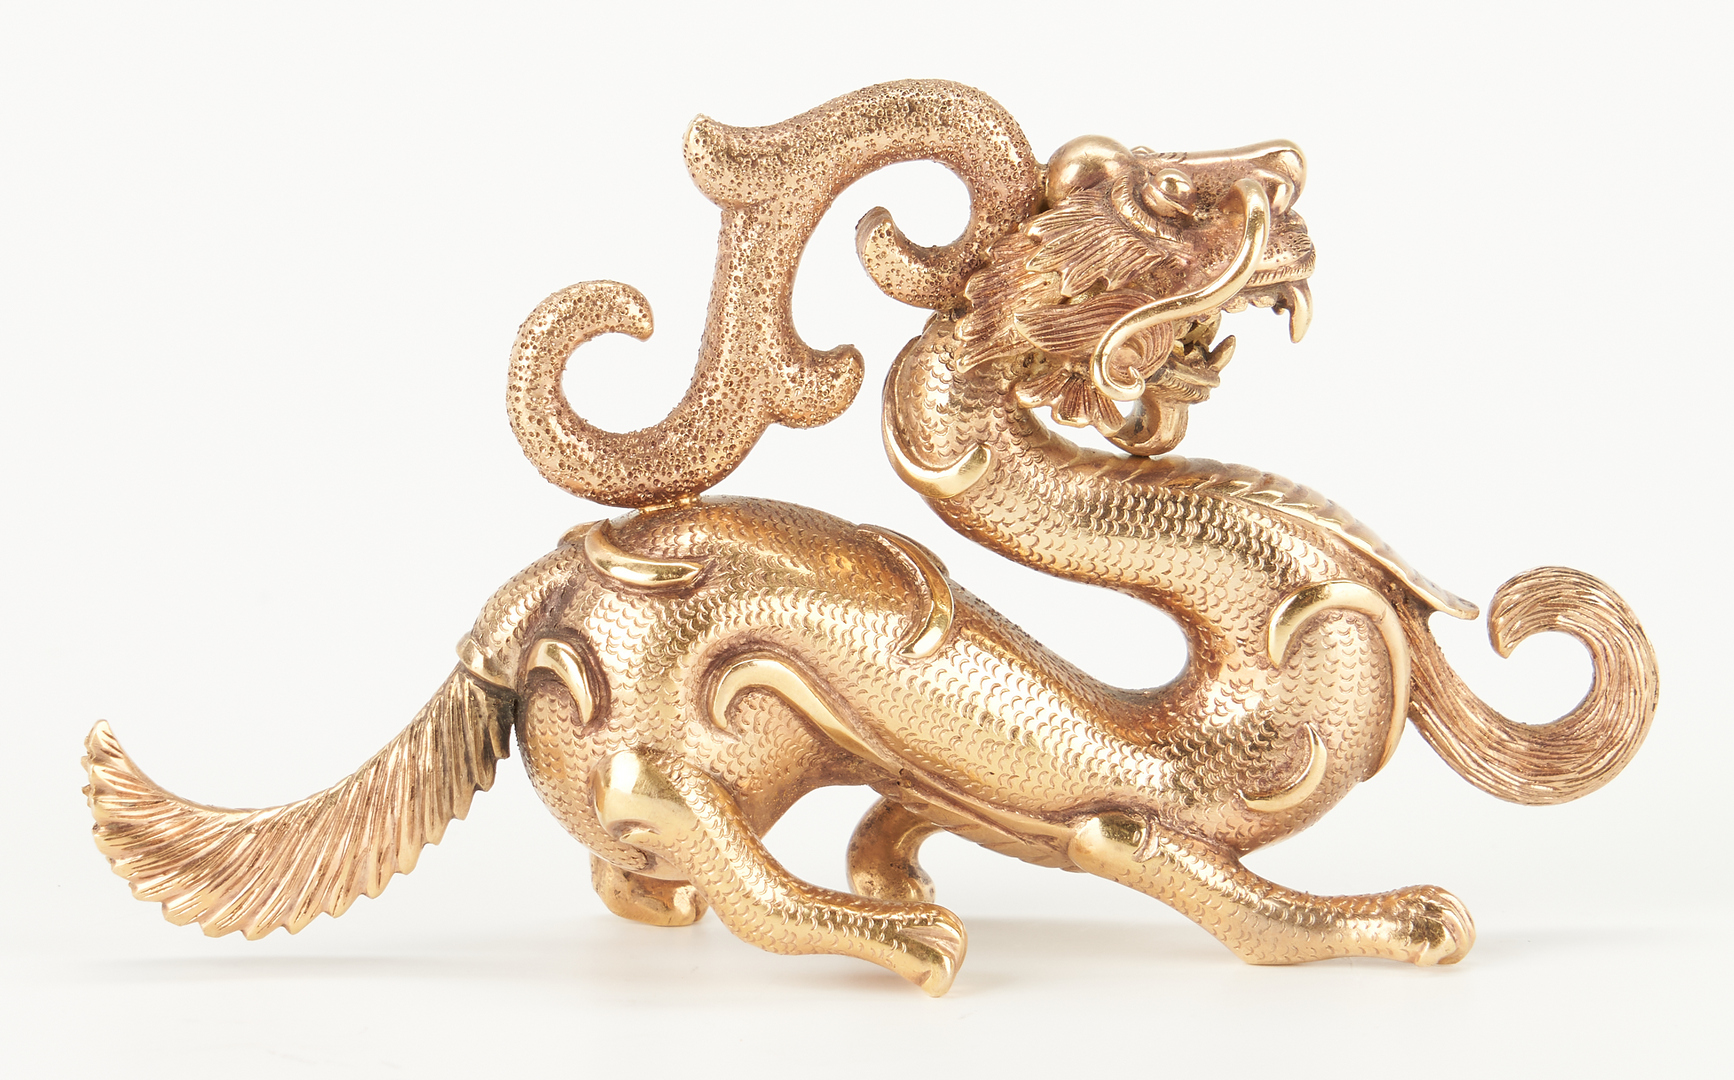 Lot 1: Chinese 14K Gold Figural Dragon on Stand